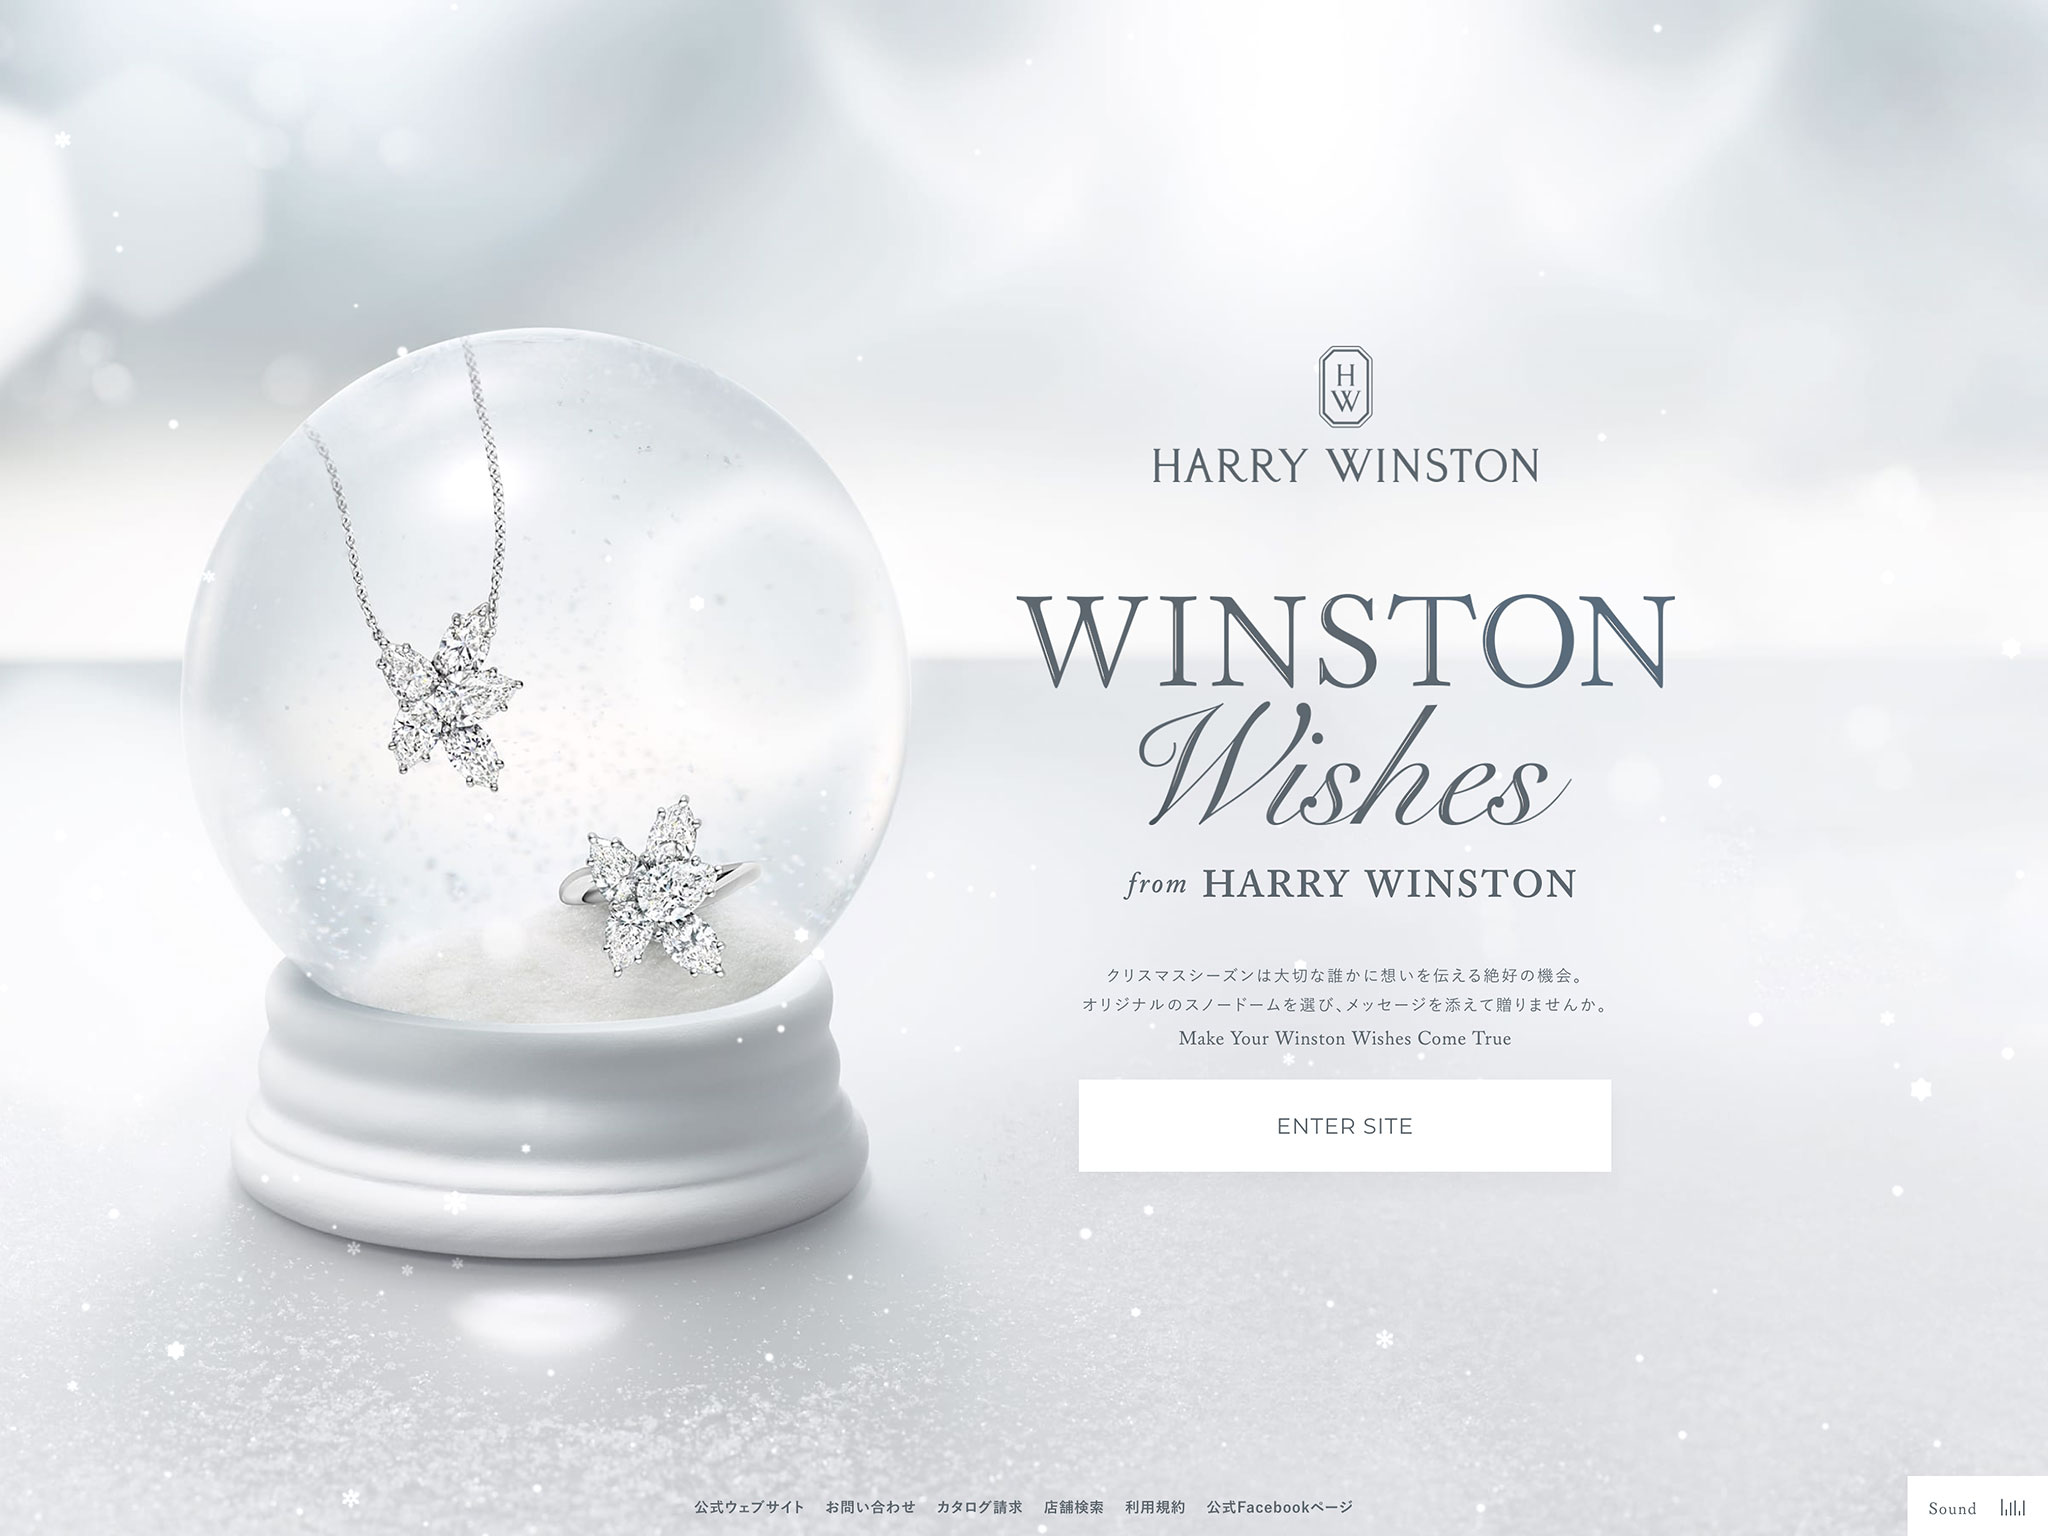 WINSTON Wishes from HARRY WINSTON